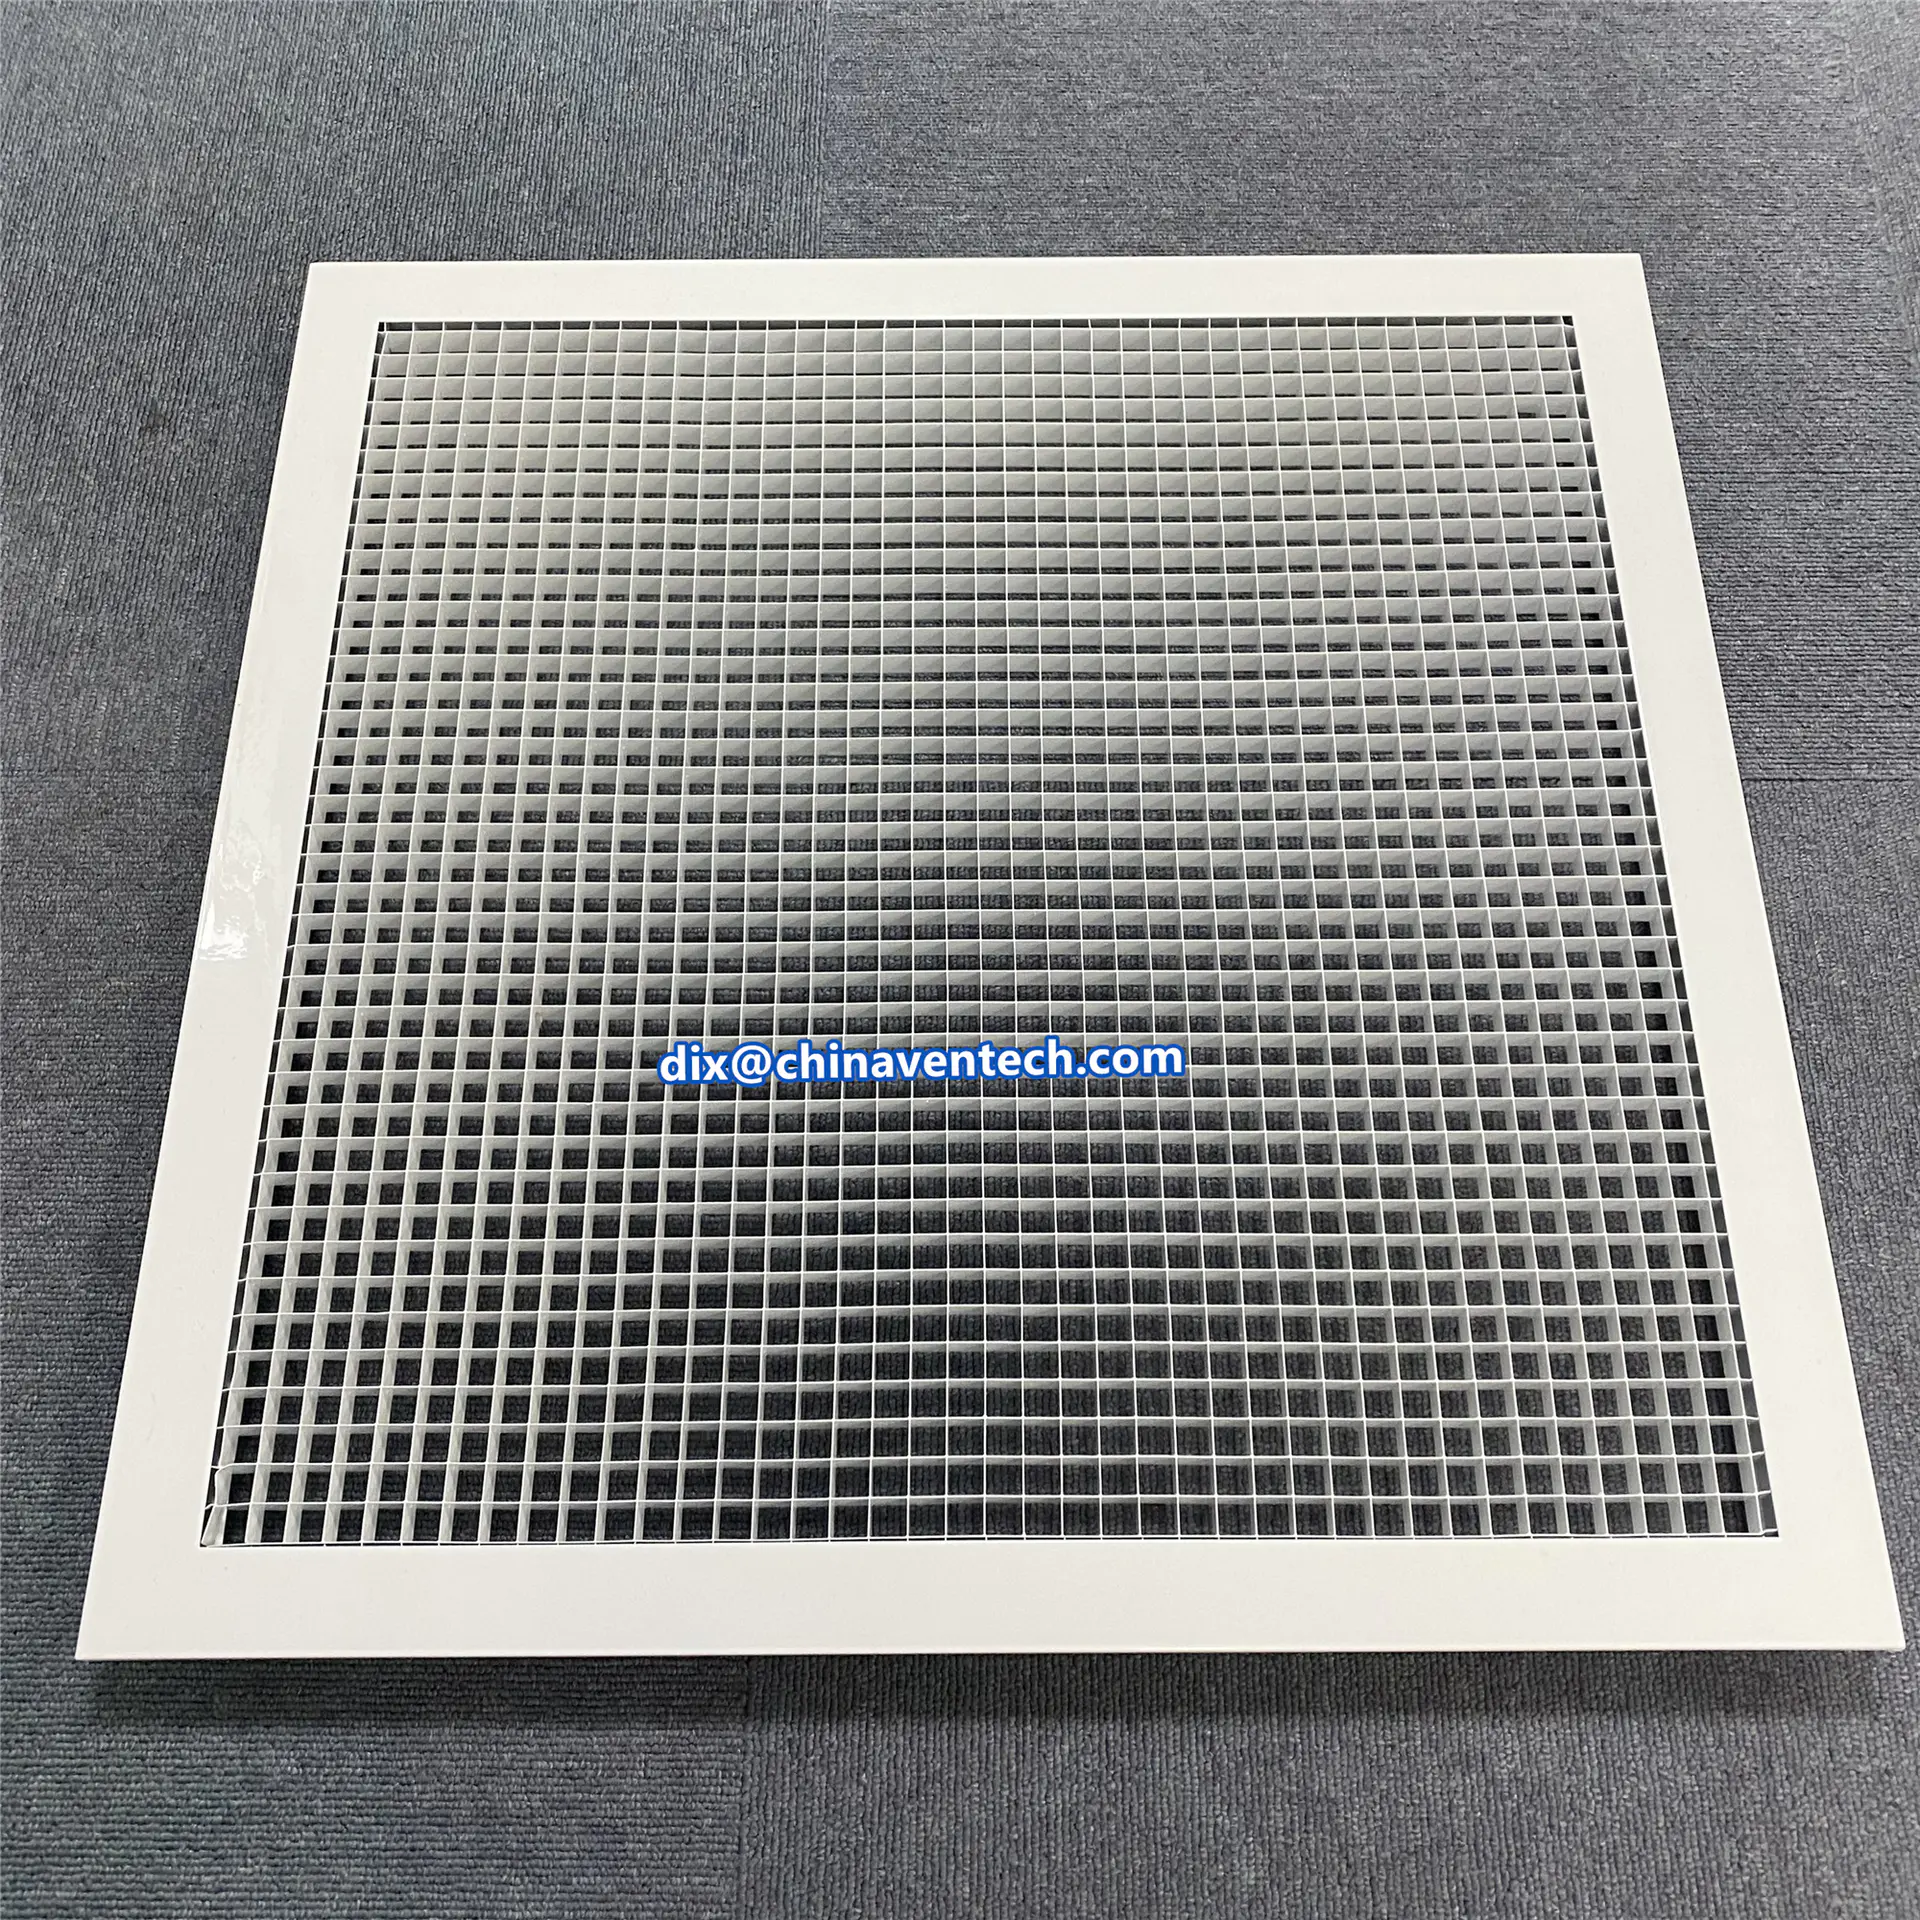 Hvac Air Diffusion Products High Quality Aluminum Sheet Return Air Egg Crate Grilles - Fixed Core